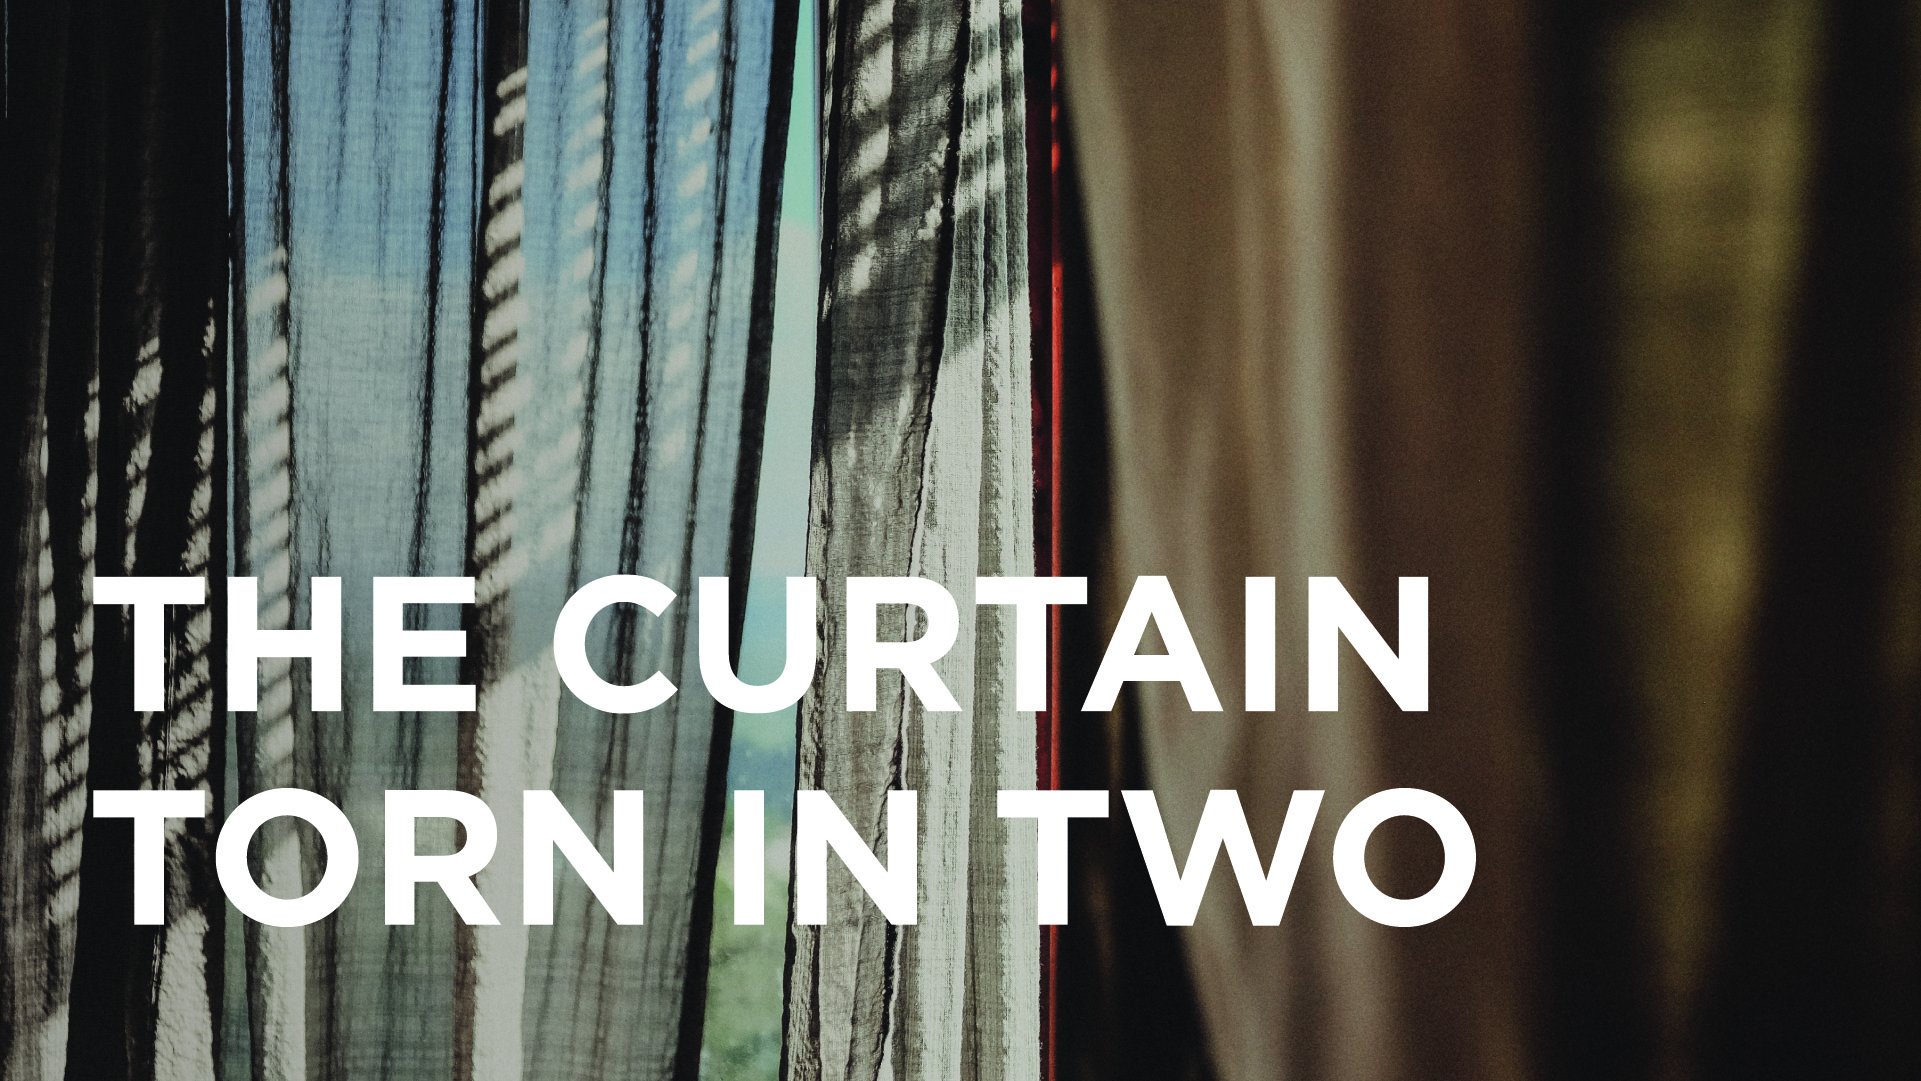 The Curtain Torn in Two